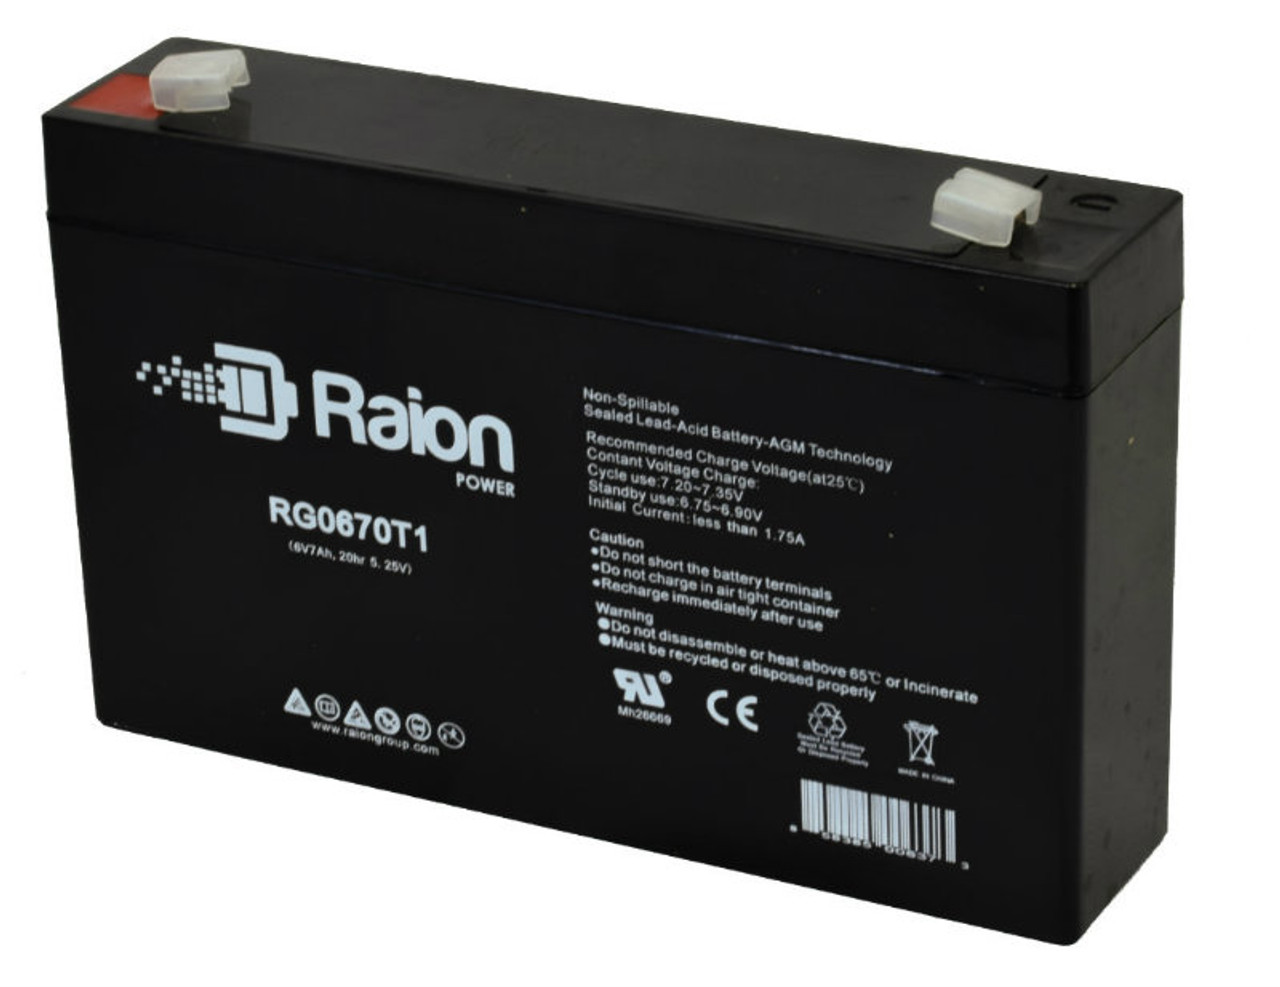 Raion Power RG0670T1 6V 7Ah Replacement Battery Cartridge for Philips Medical Systems EMERGENCY RESPONDER medical equipment